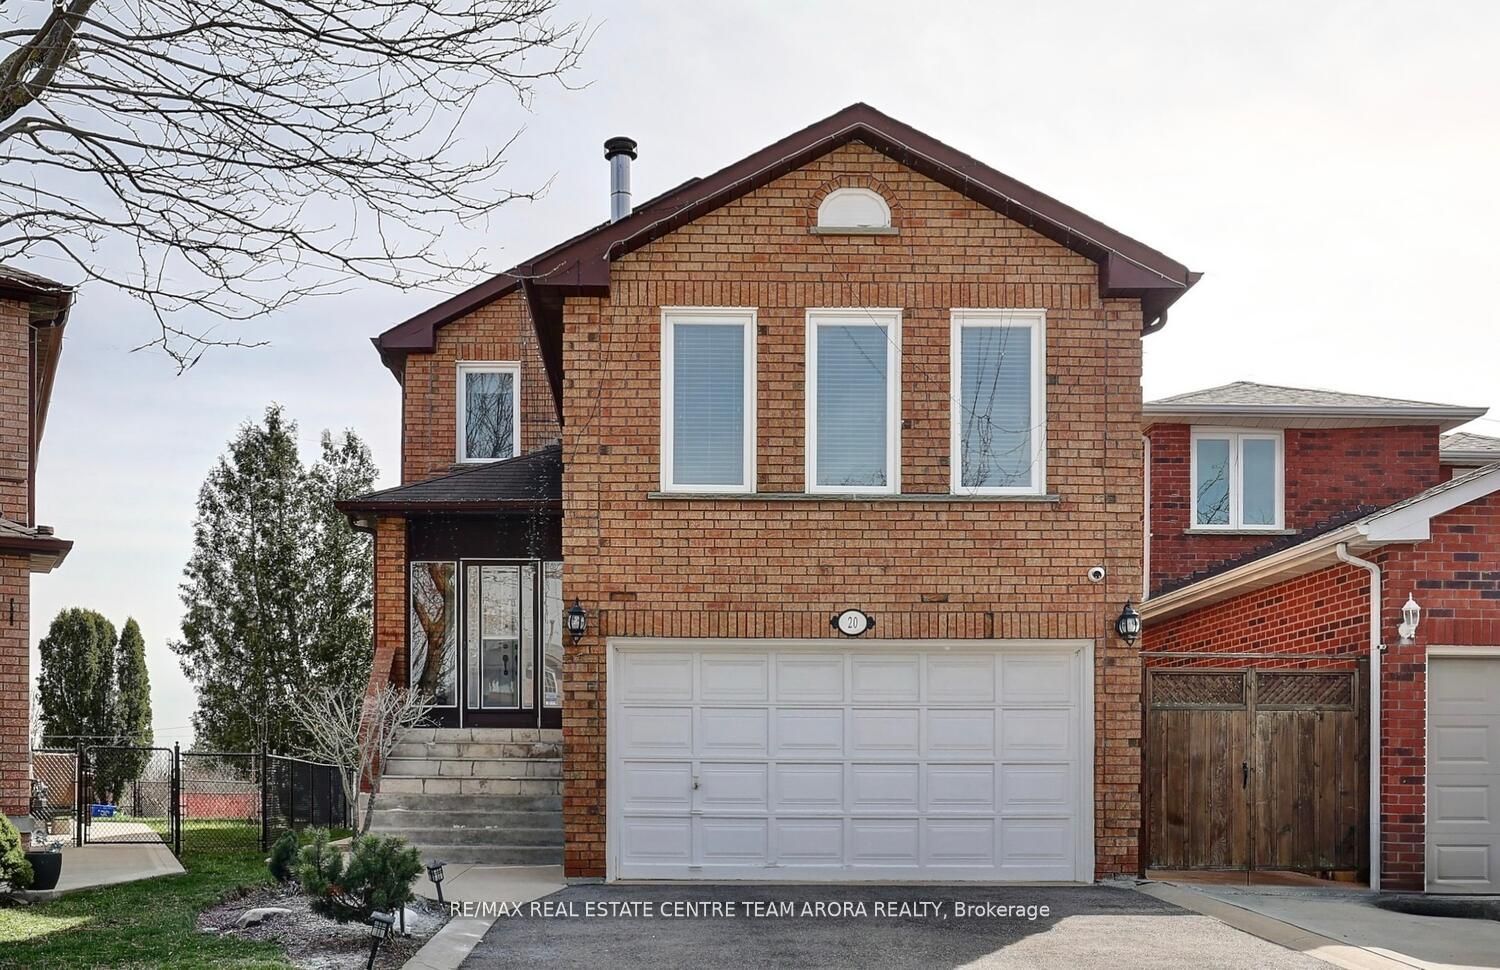 Detached house for sale at 20 Preakness Crt Brampton Ontario